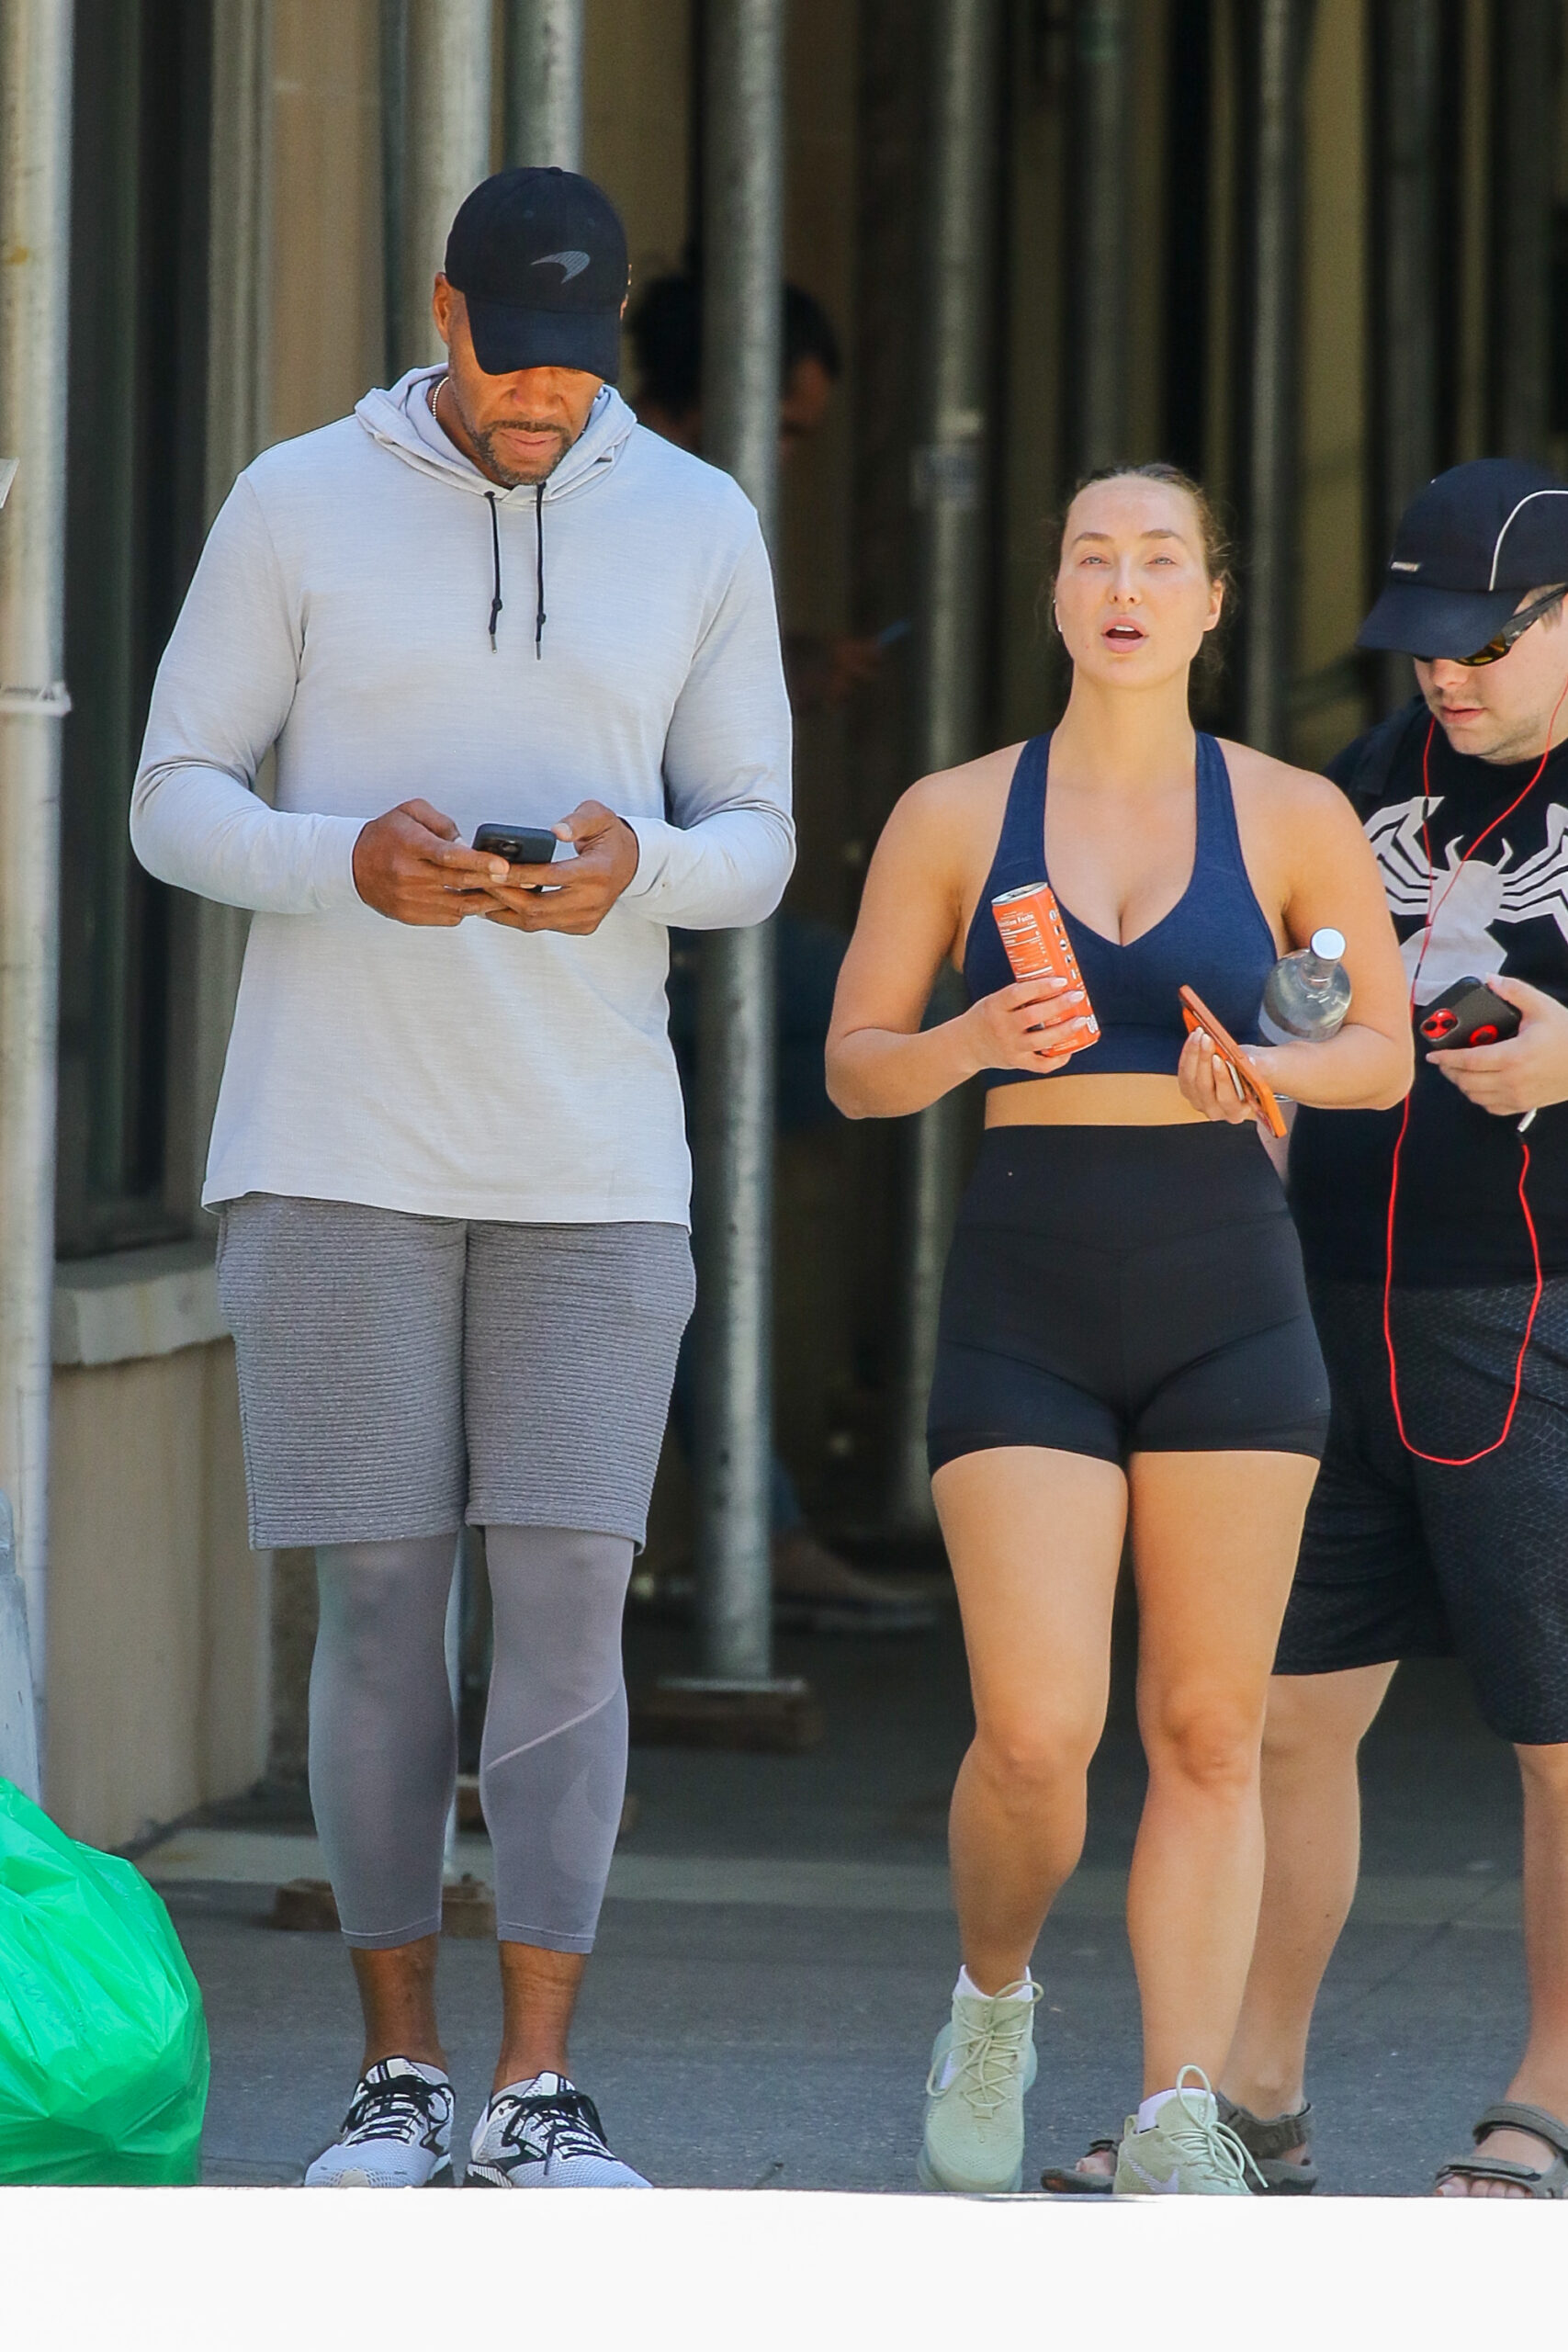 Michael and Kayla were seen outfitted in workout attire as the couple headed to the gym in photos exclusively obtained by the U.S. Sun